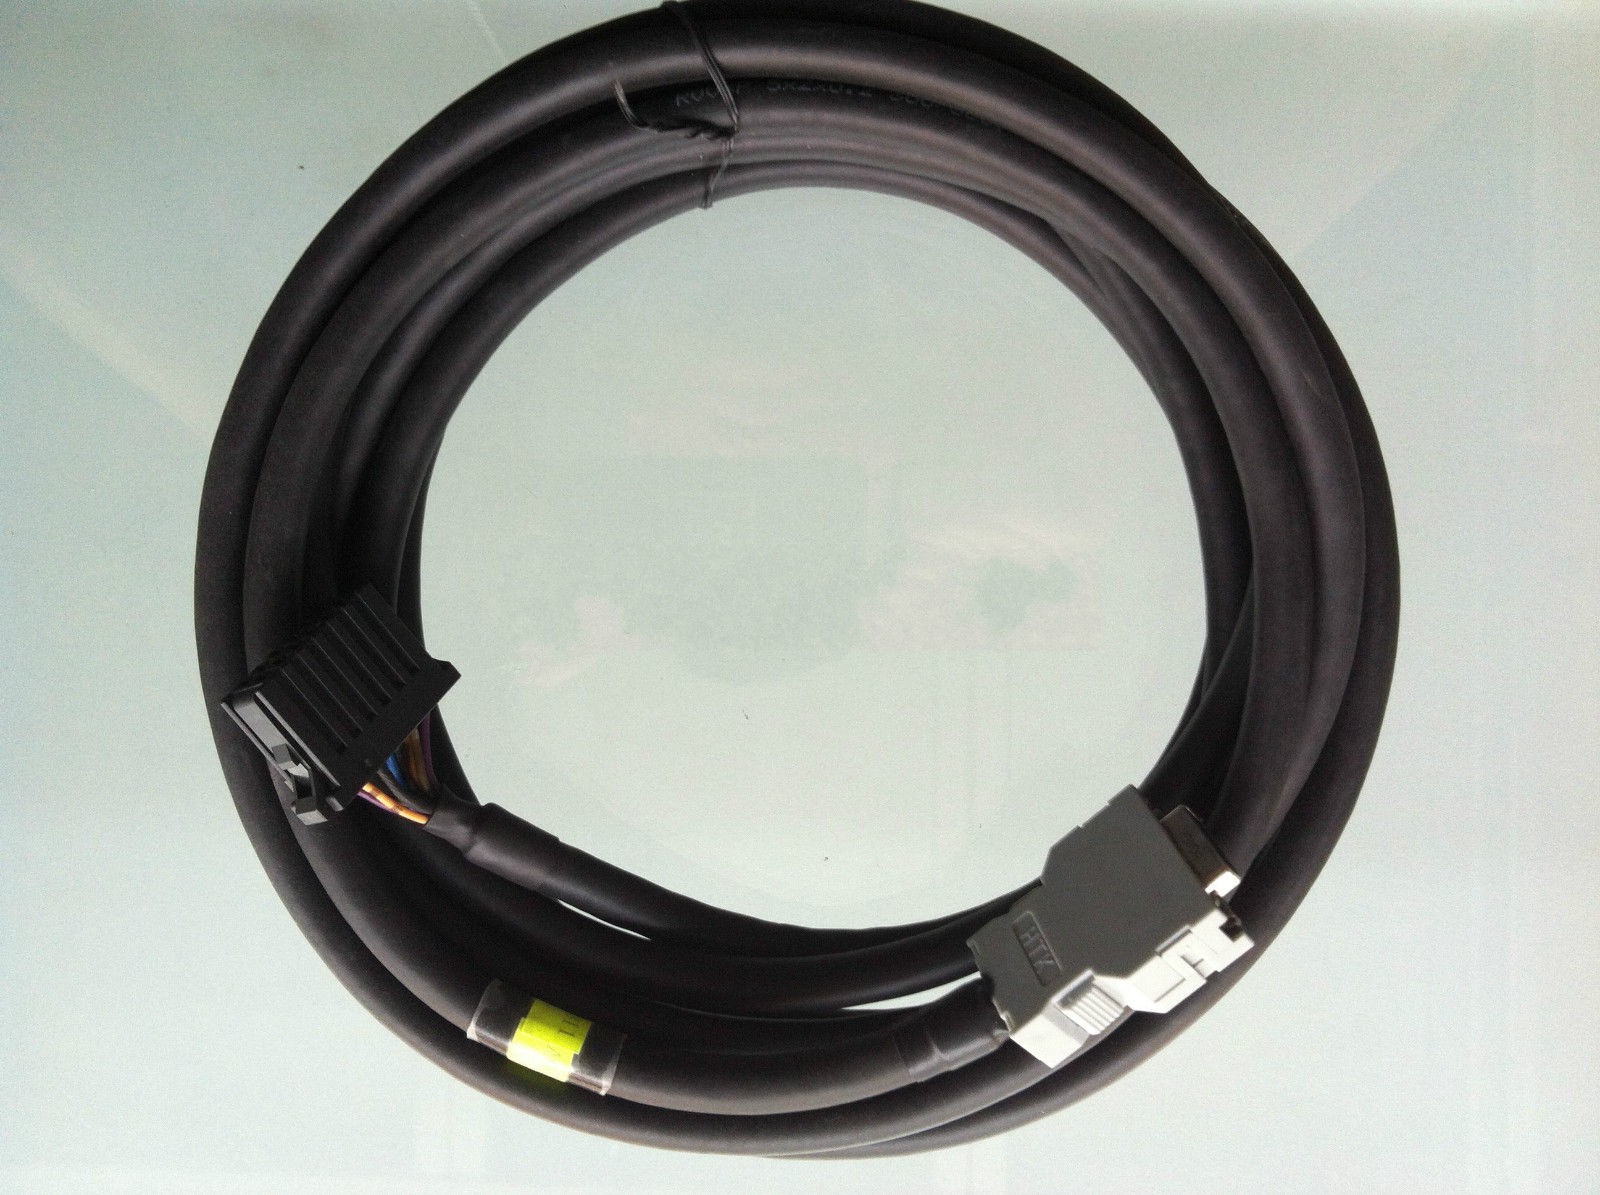 1CPS NEW FOR FANUC Spindle Encoder PLG Cable A06B-6078-K811-5M 5M